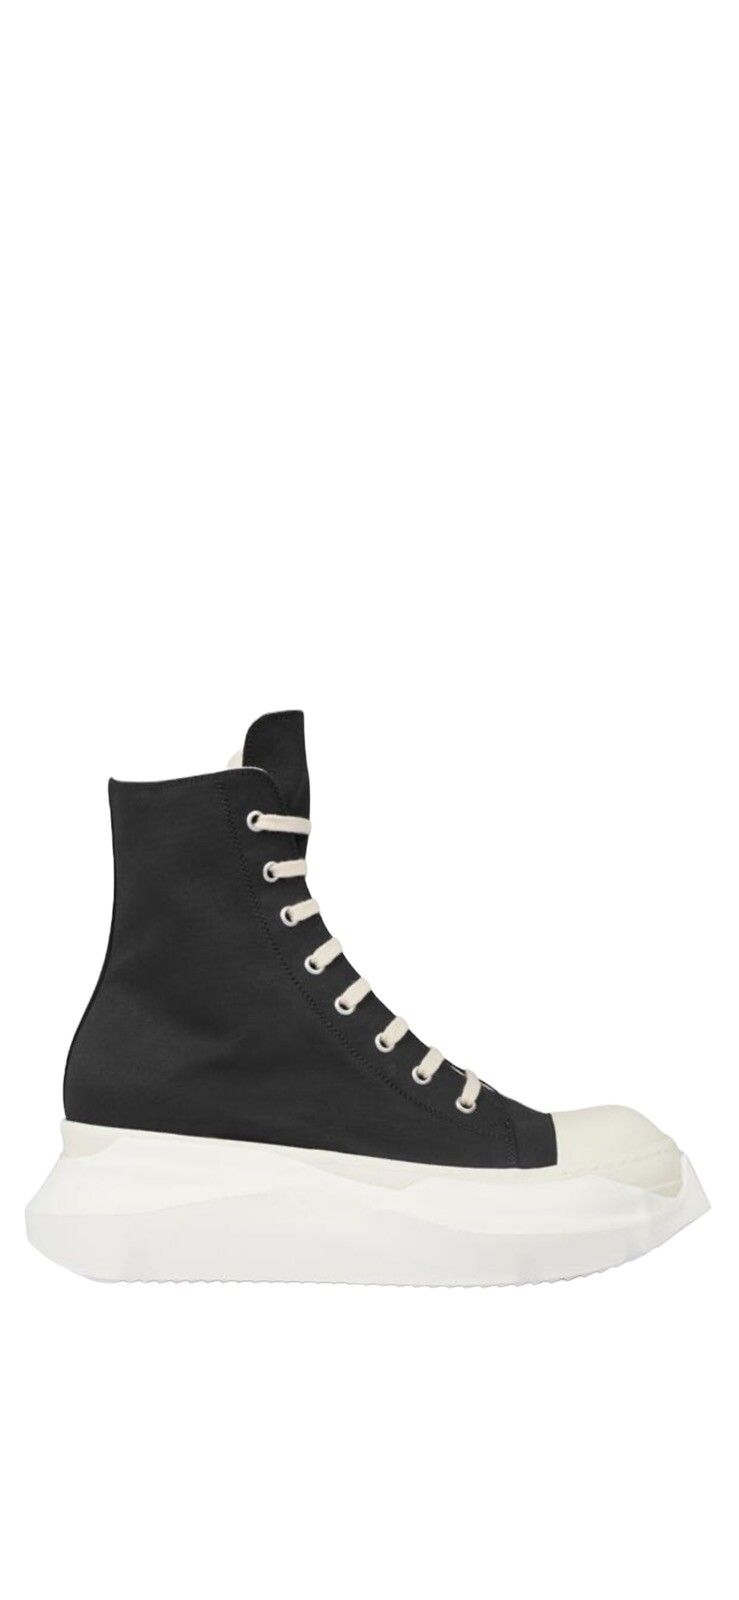 Rick Owens Drkshdw Rick Owen DS Abstract HI Sneakers Size US 11 / EU 44 - 1 Preview